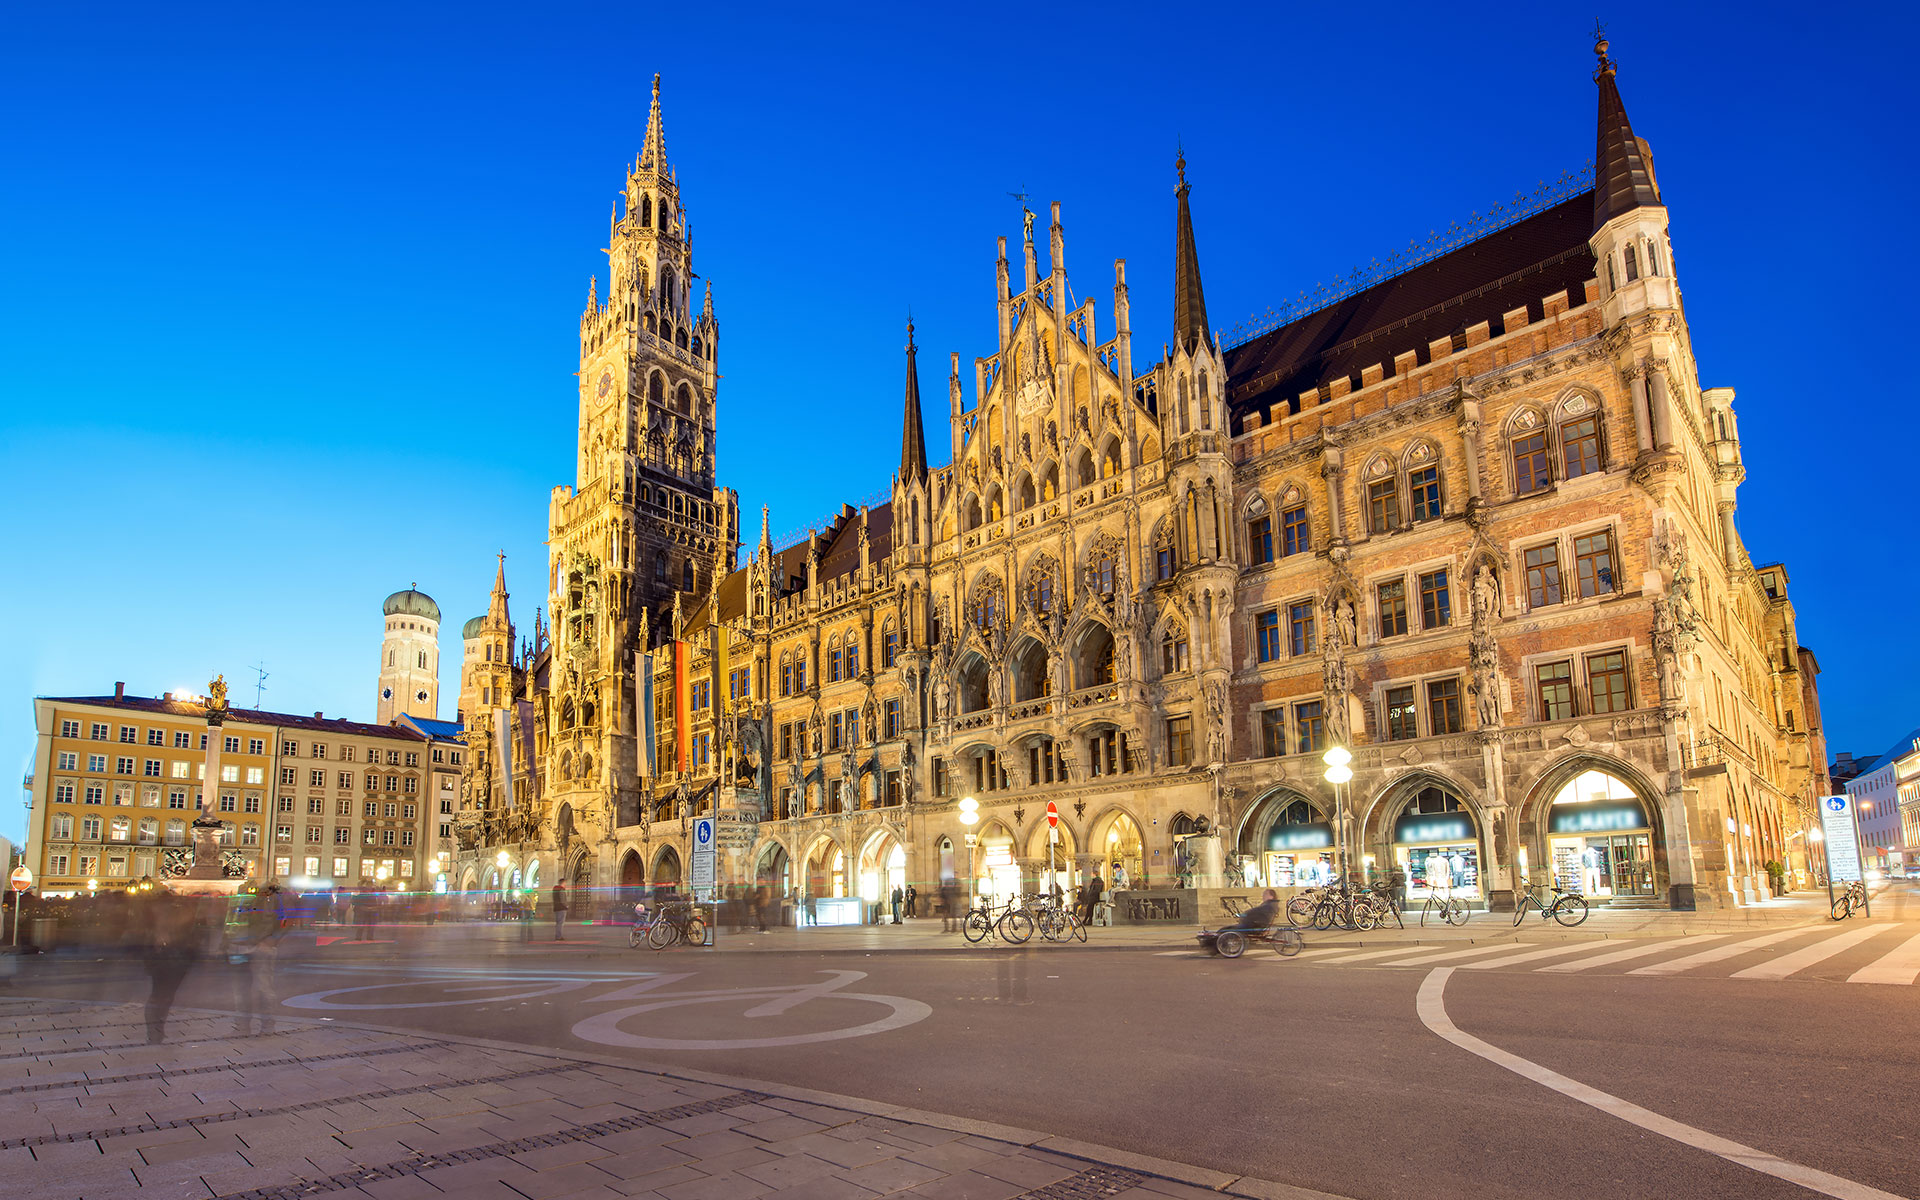 New ICE Sprinter services will link Munich and Berlin from December 2017 in just four hours. Shown here is Munich's Marienplatz and the city hall (photo © Prasit Rodphan / dreamstime.com).